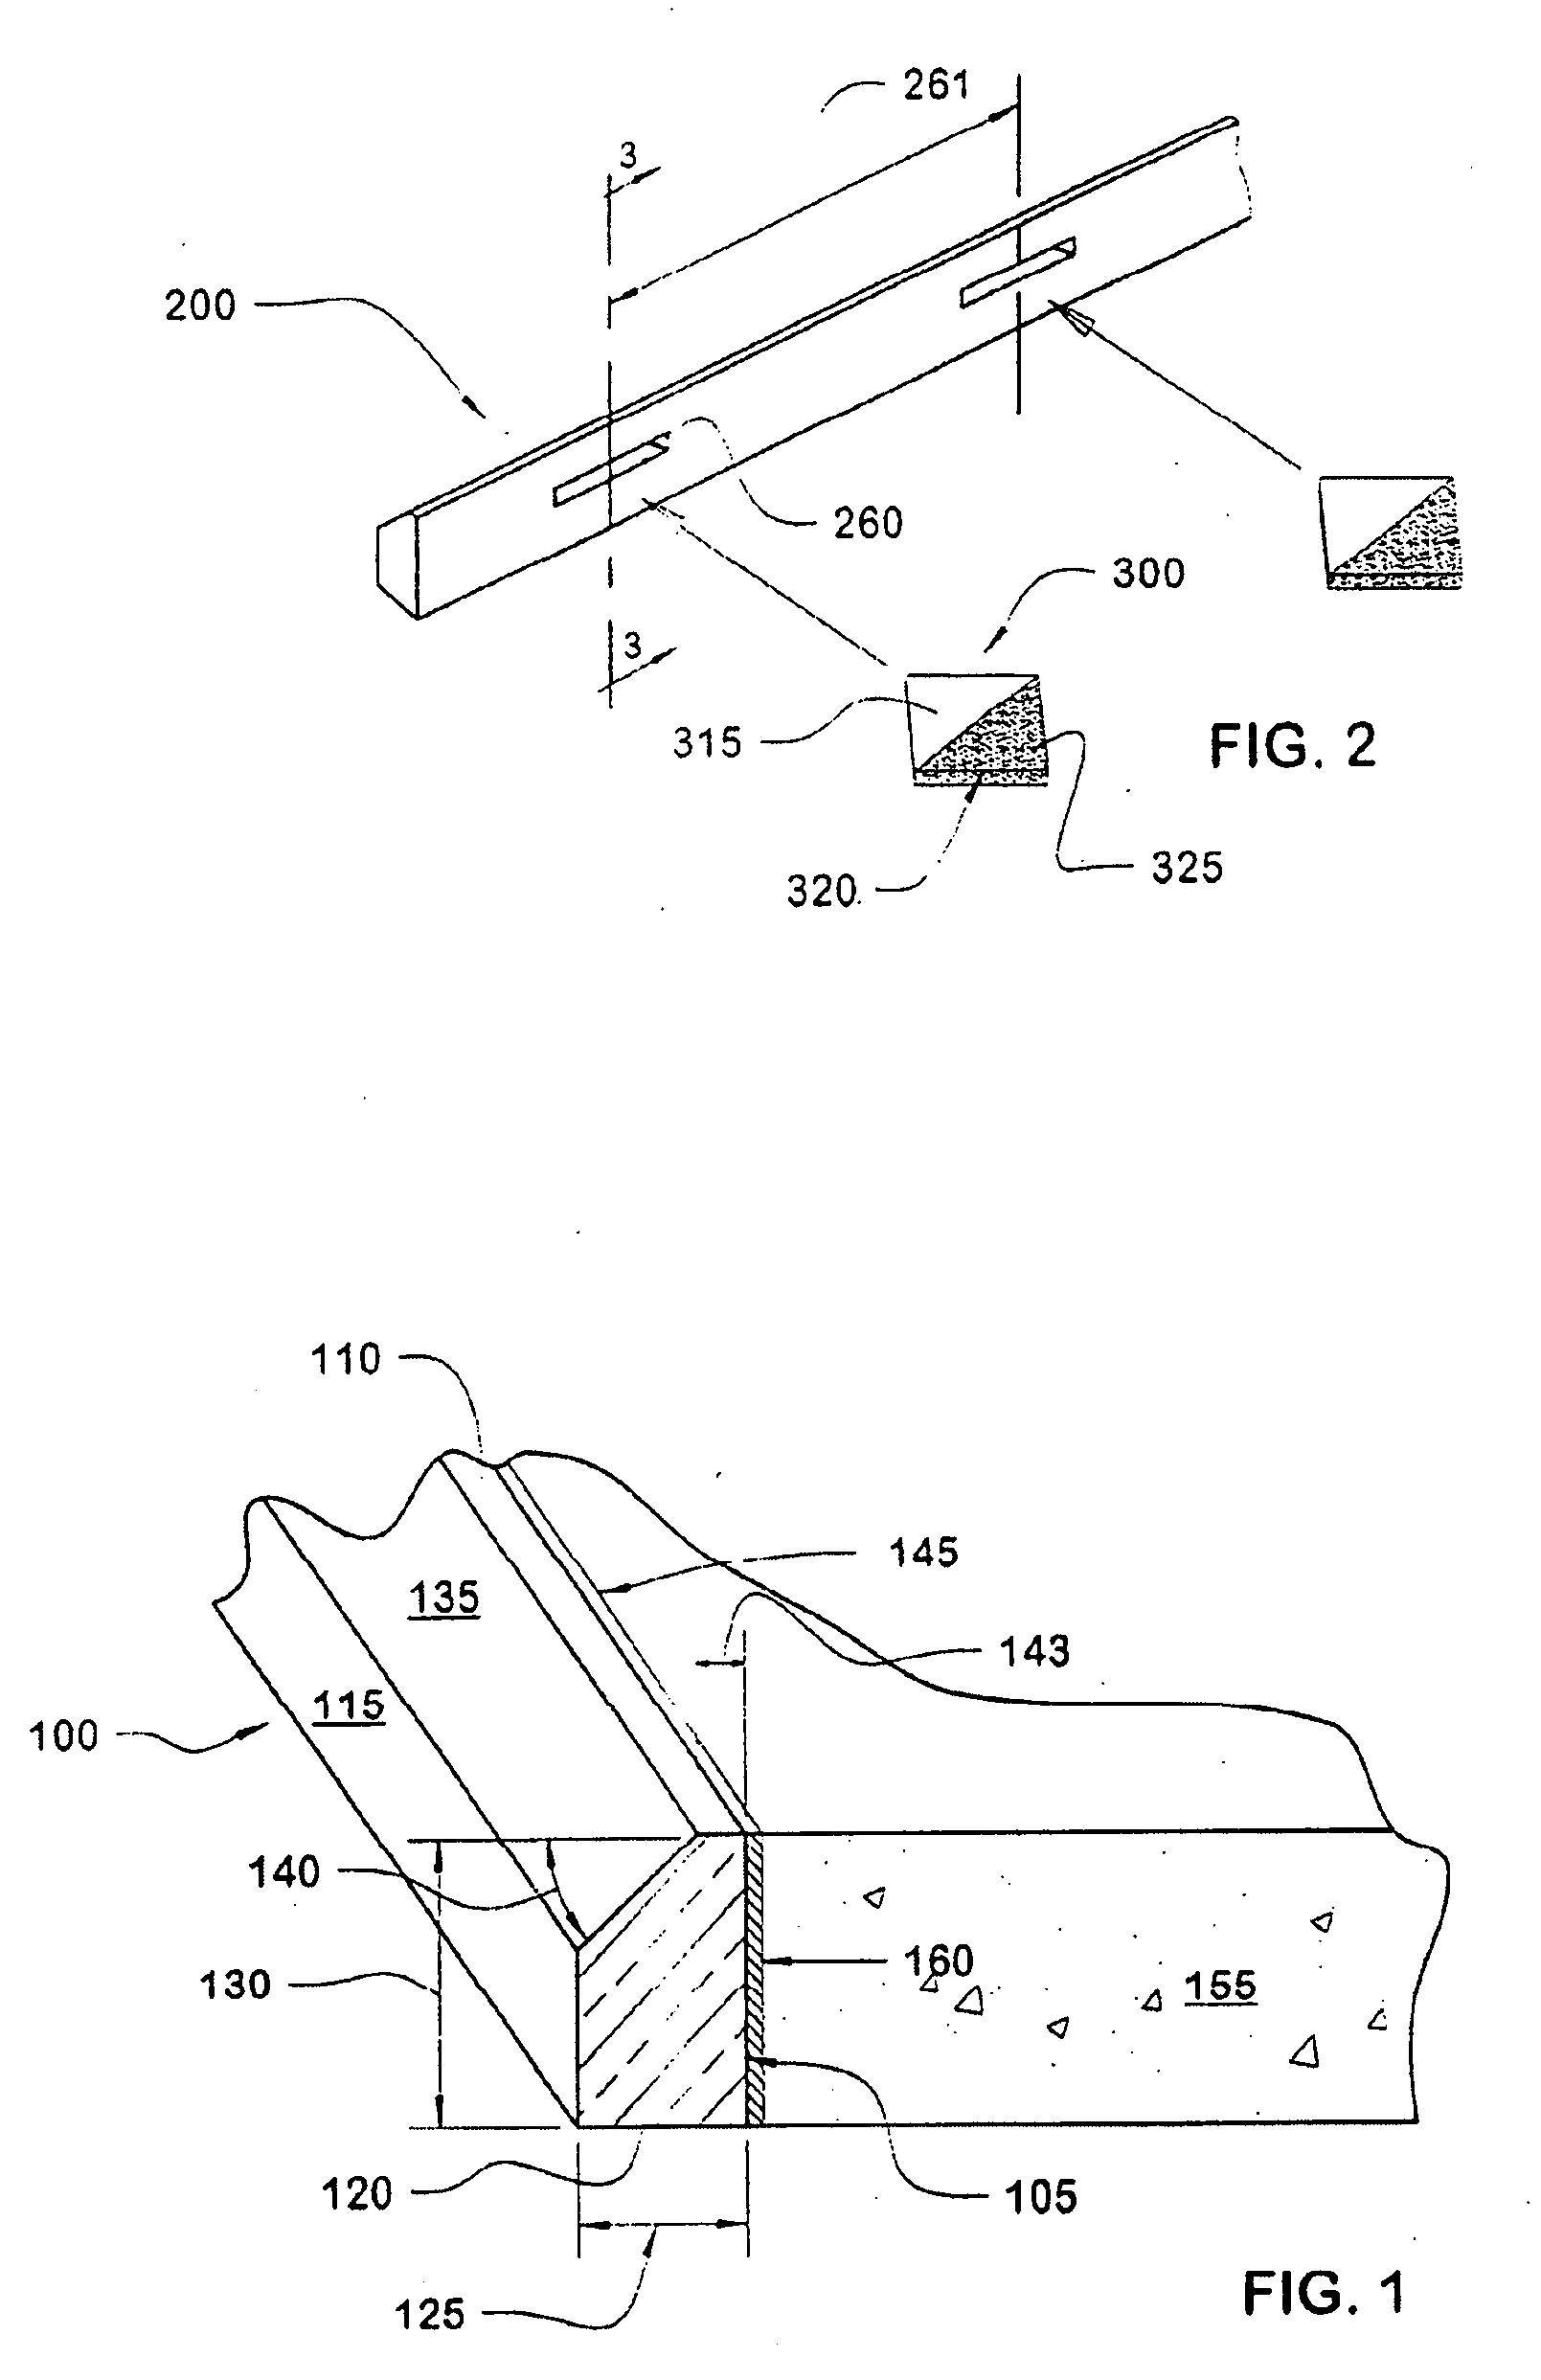 Method of Forming Concrete